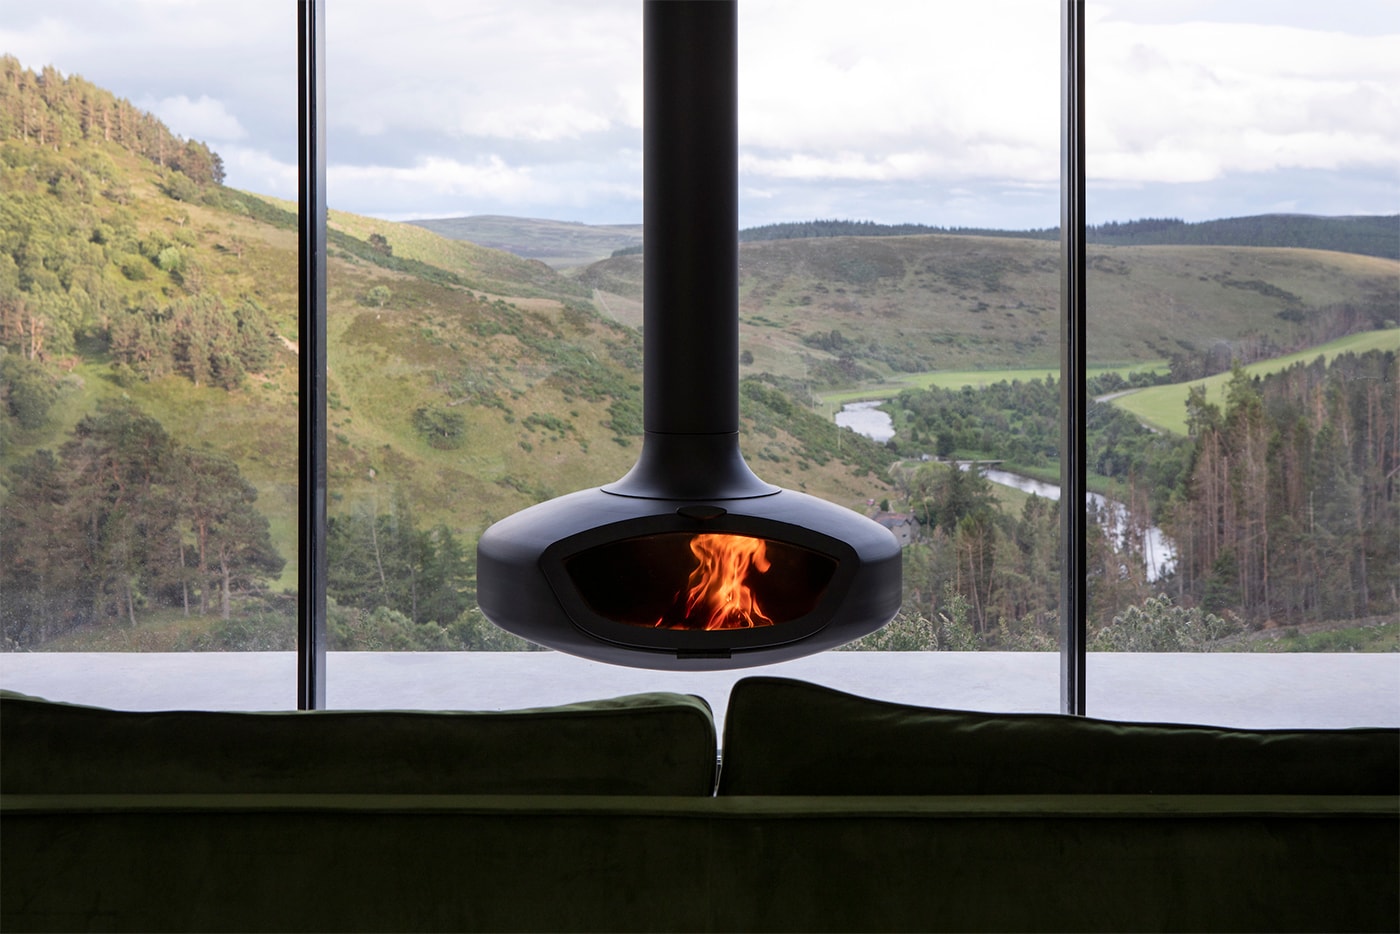 "Spyon Cop" House is Nestled Within the Scottish Wilderness